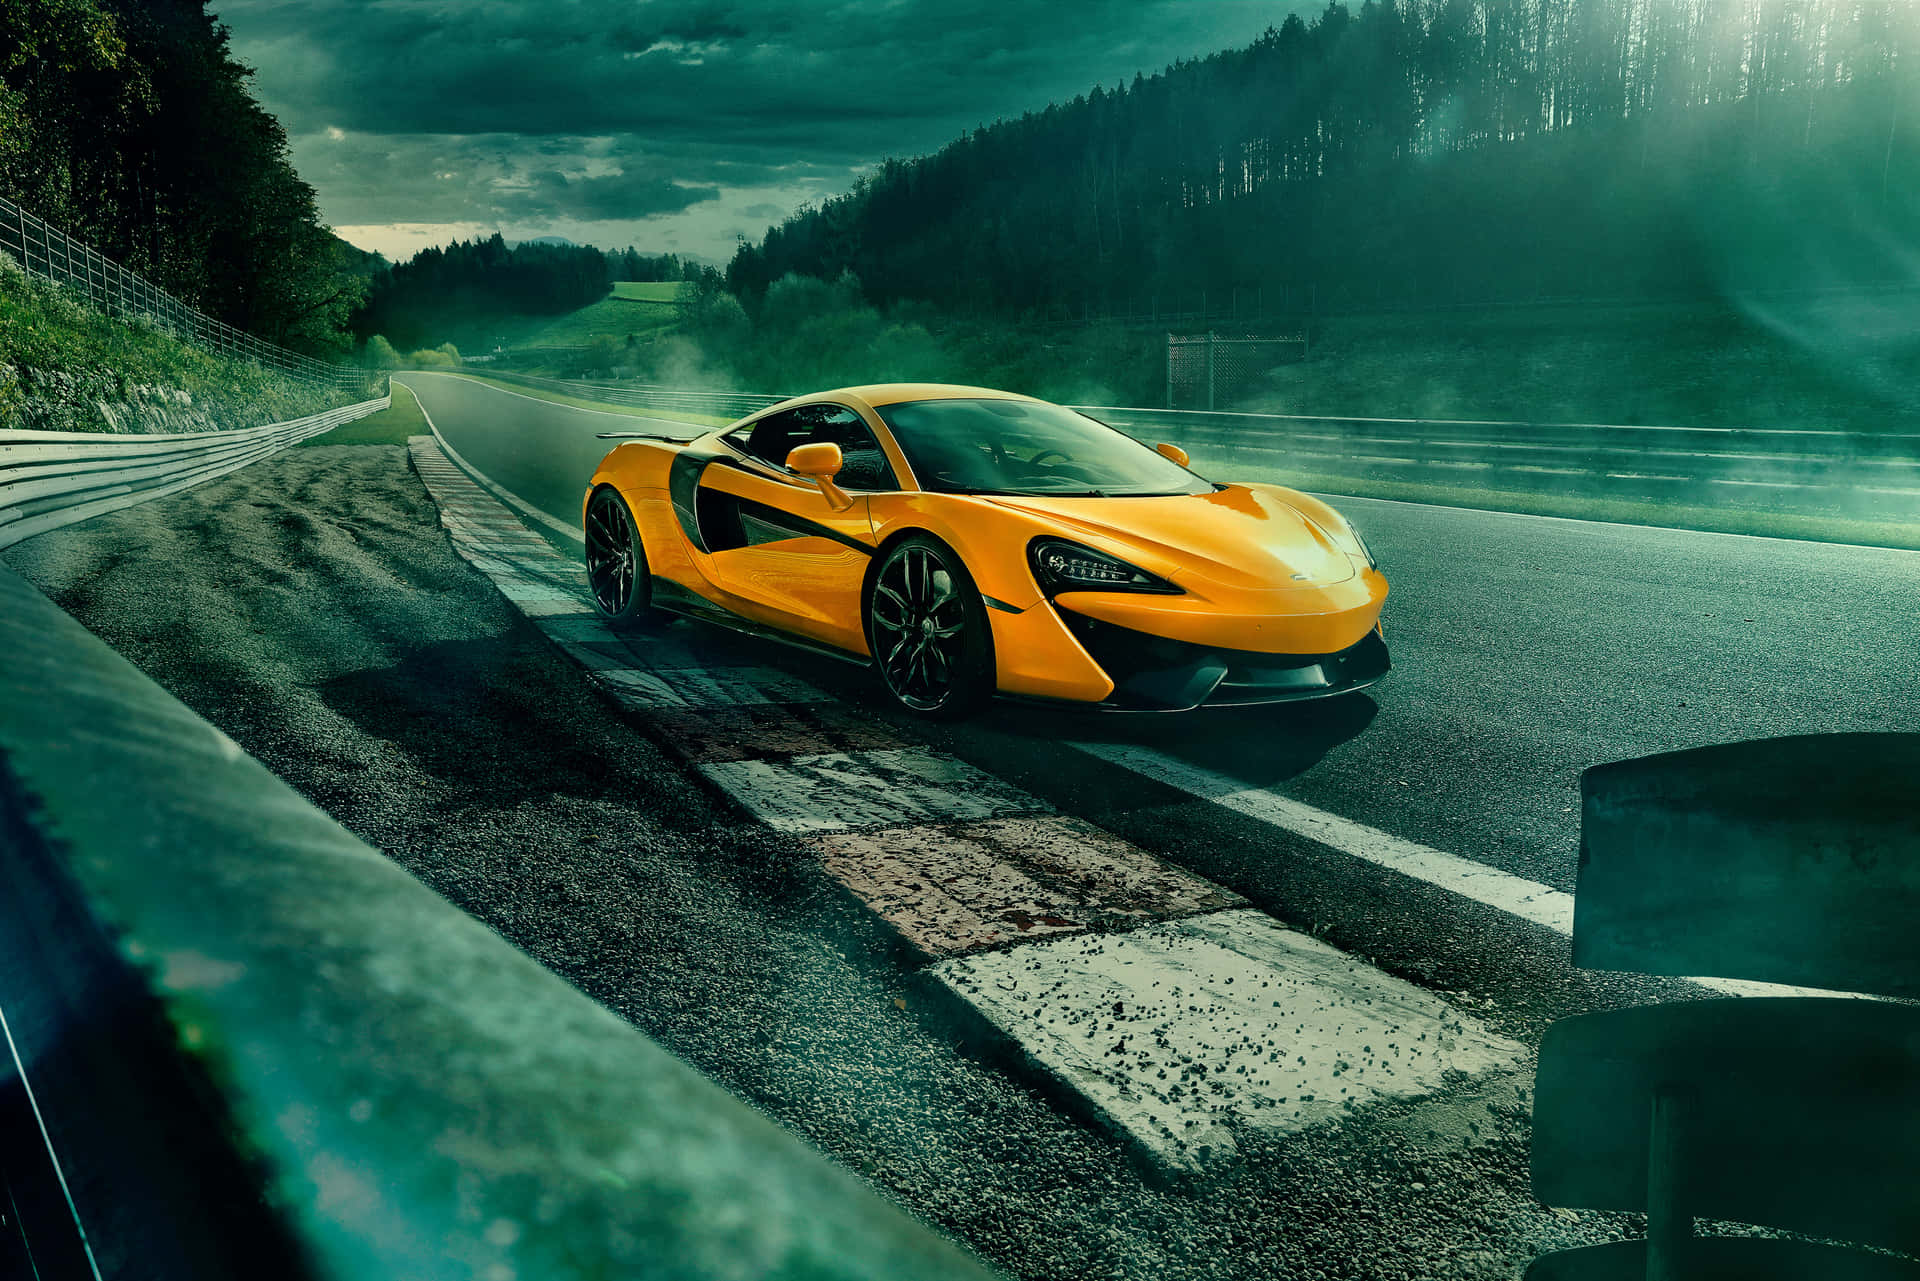 Be Cool and Stylish in the New McLaren Wallpaper